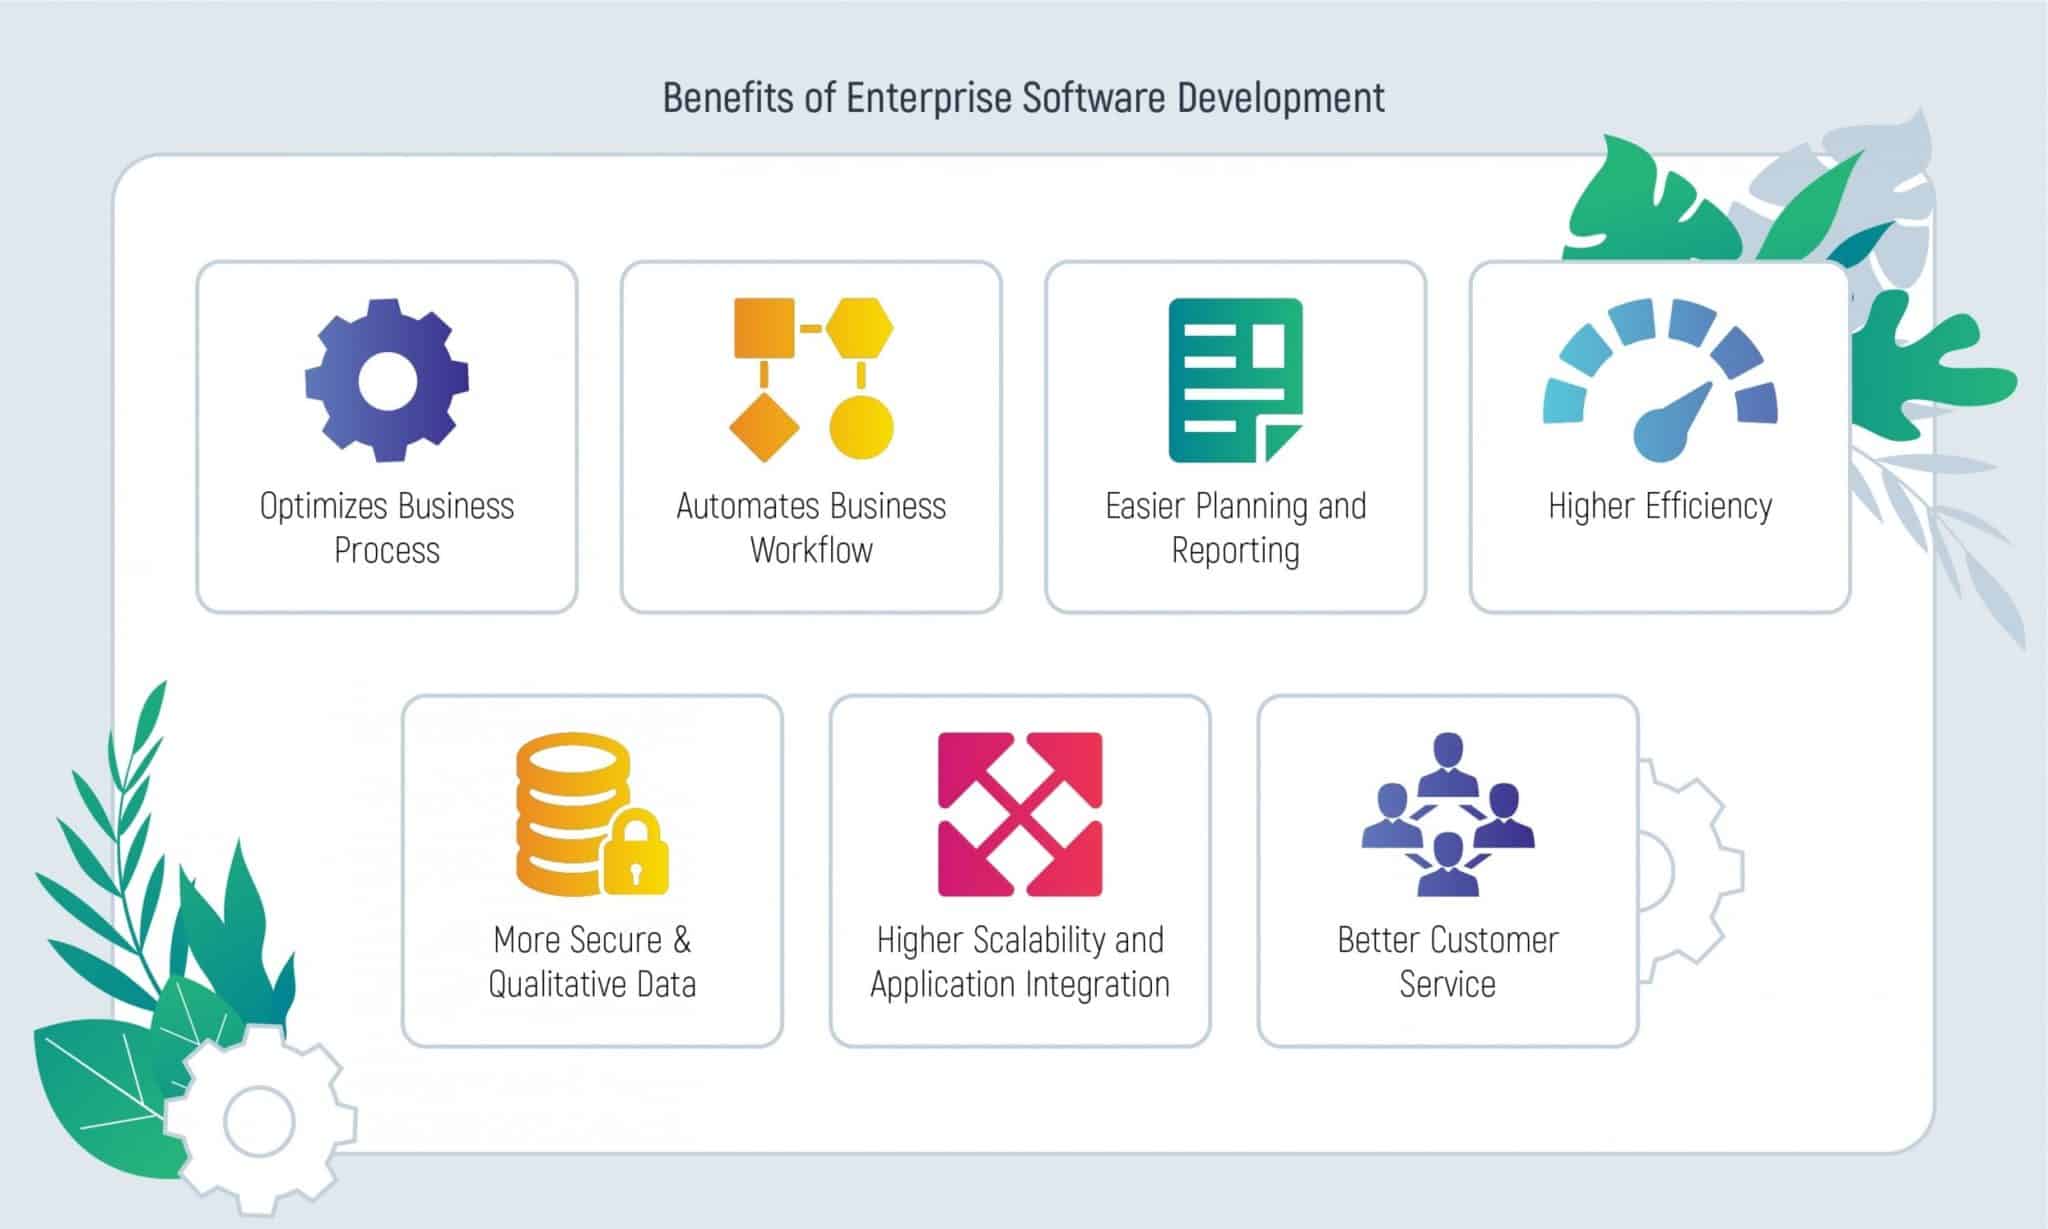 7 Stages of Developing a Smart Enterprise Solution